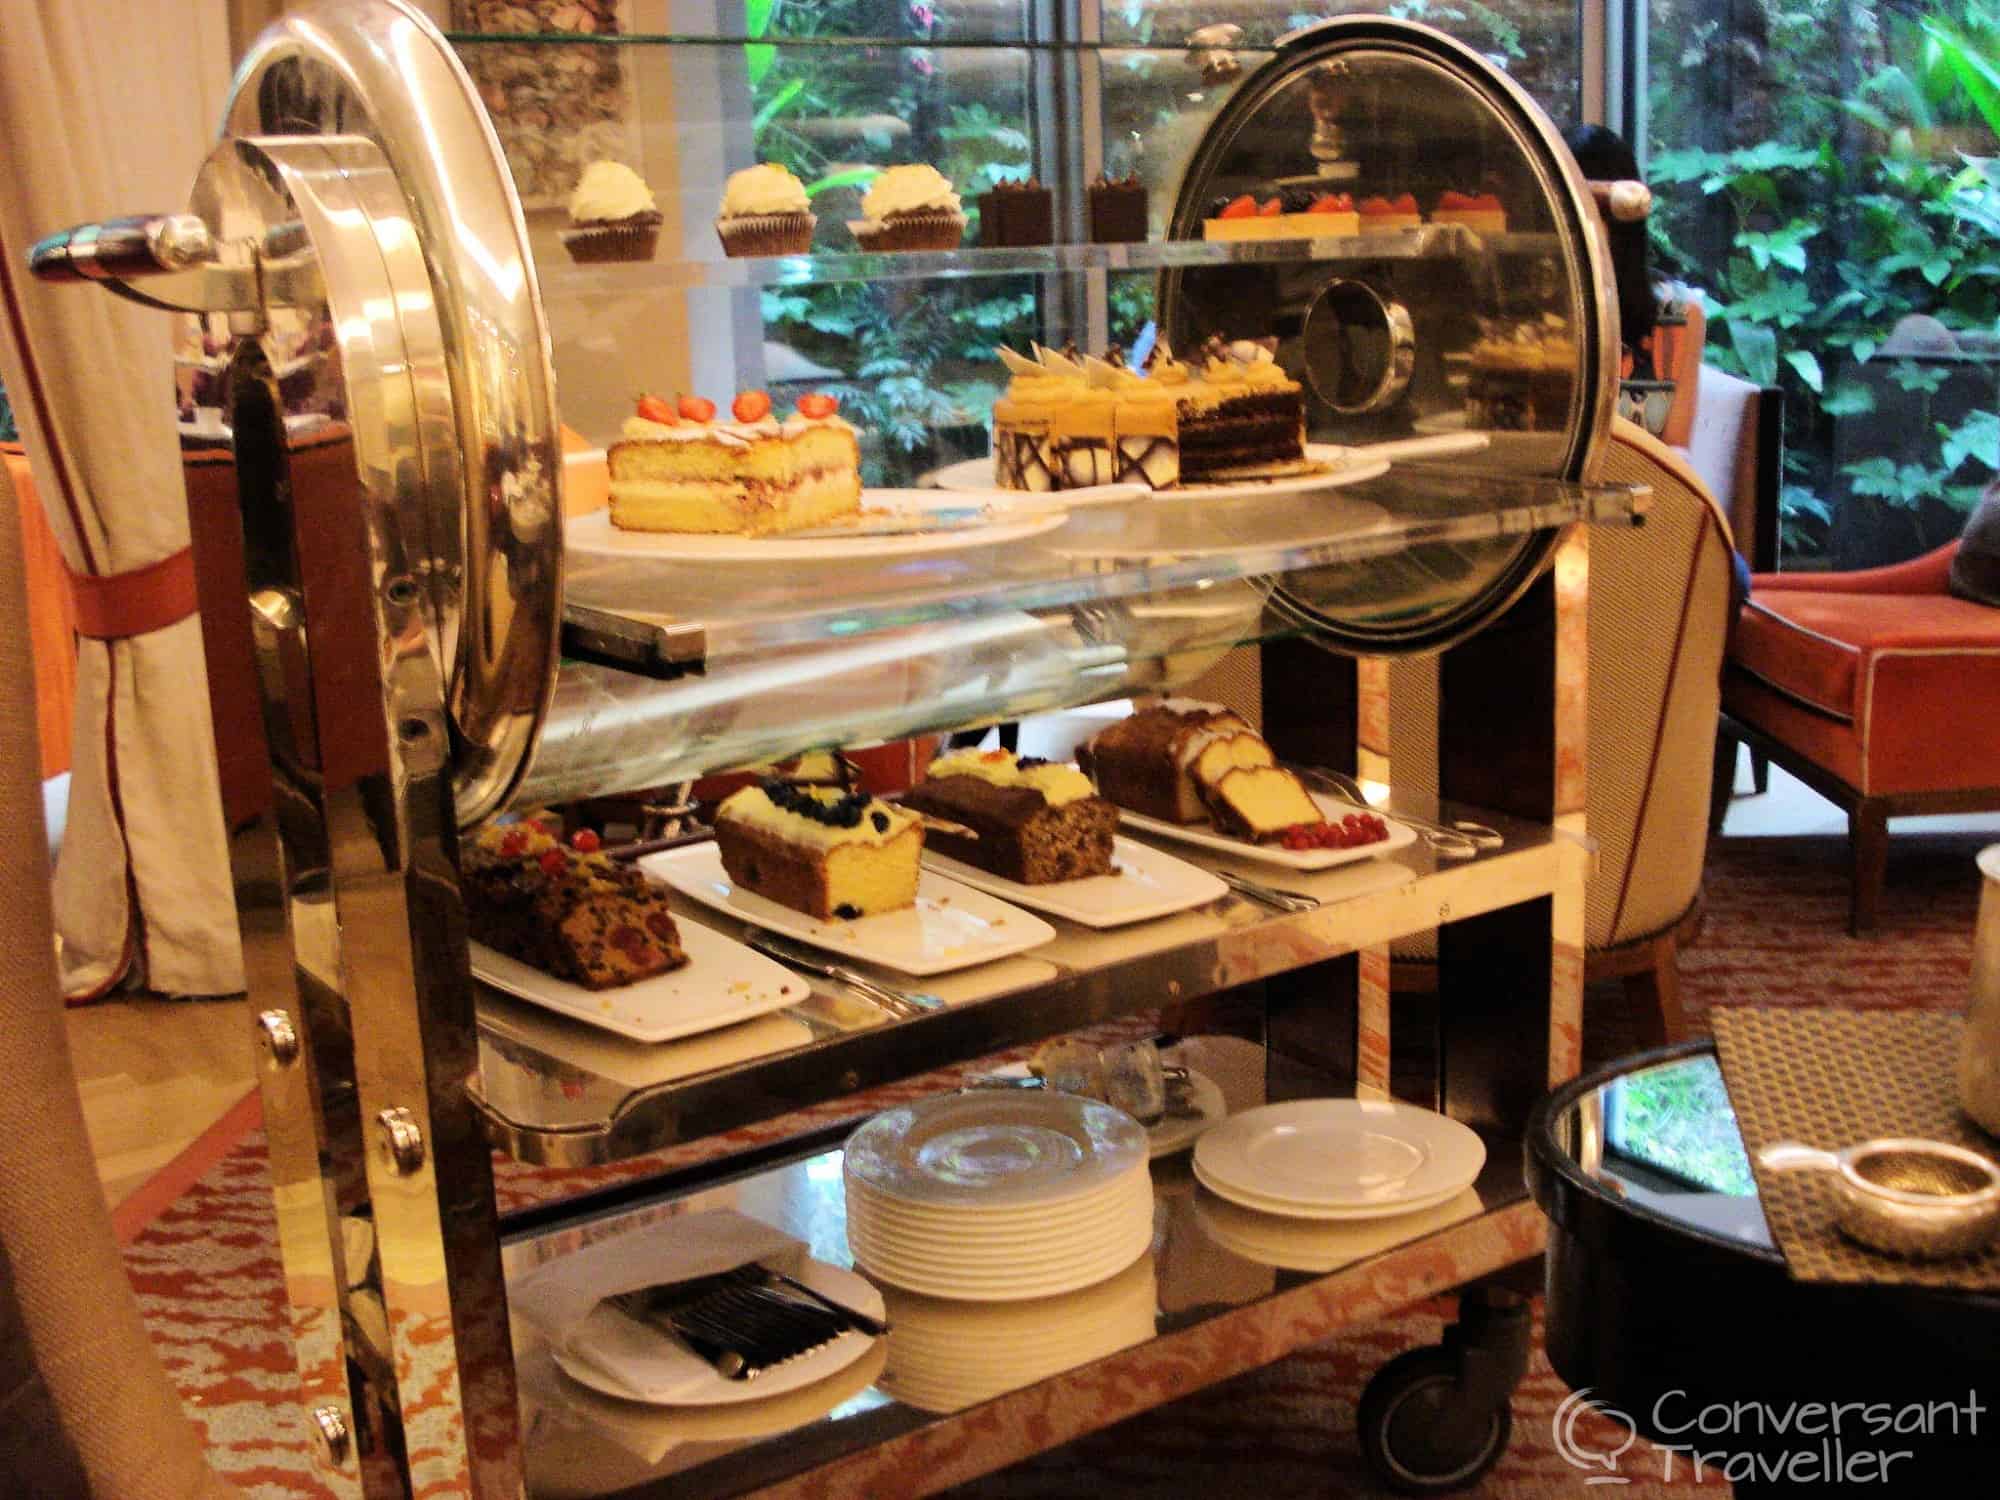 The sweet trolley at the Athenaeum Hotel, London